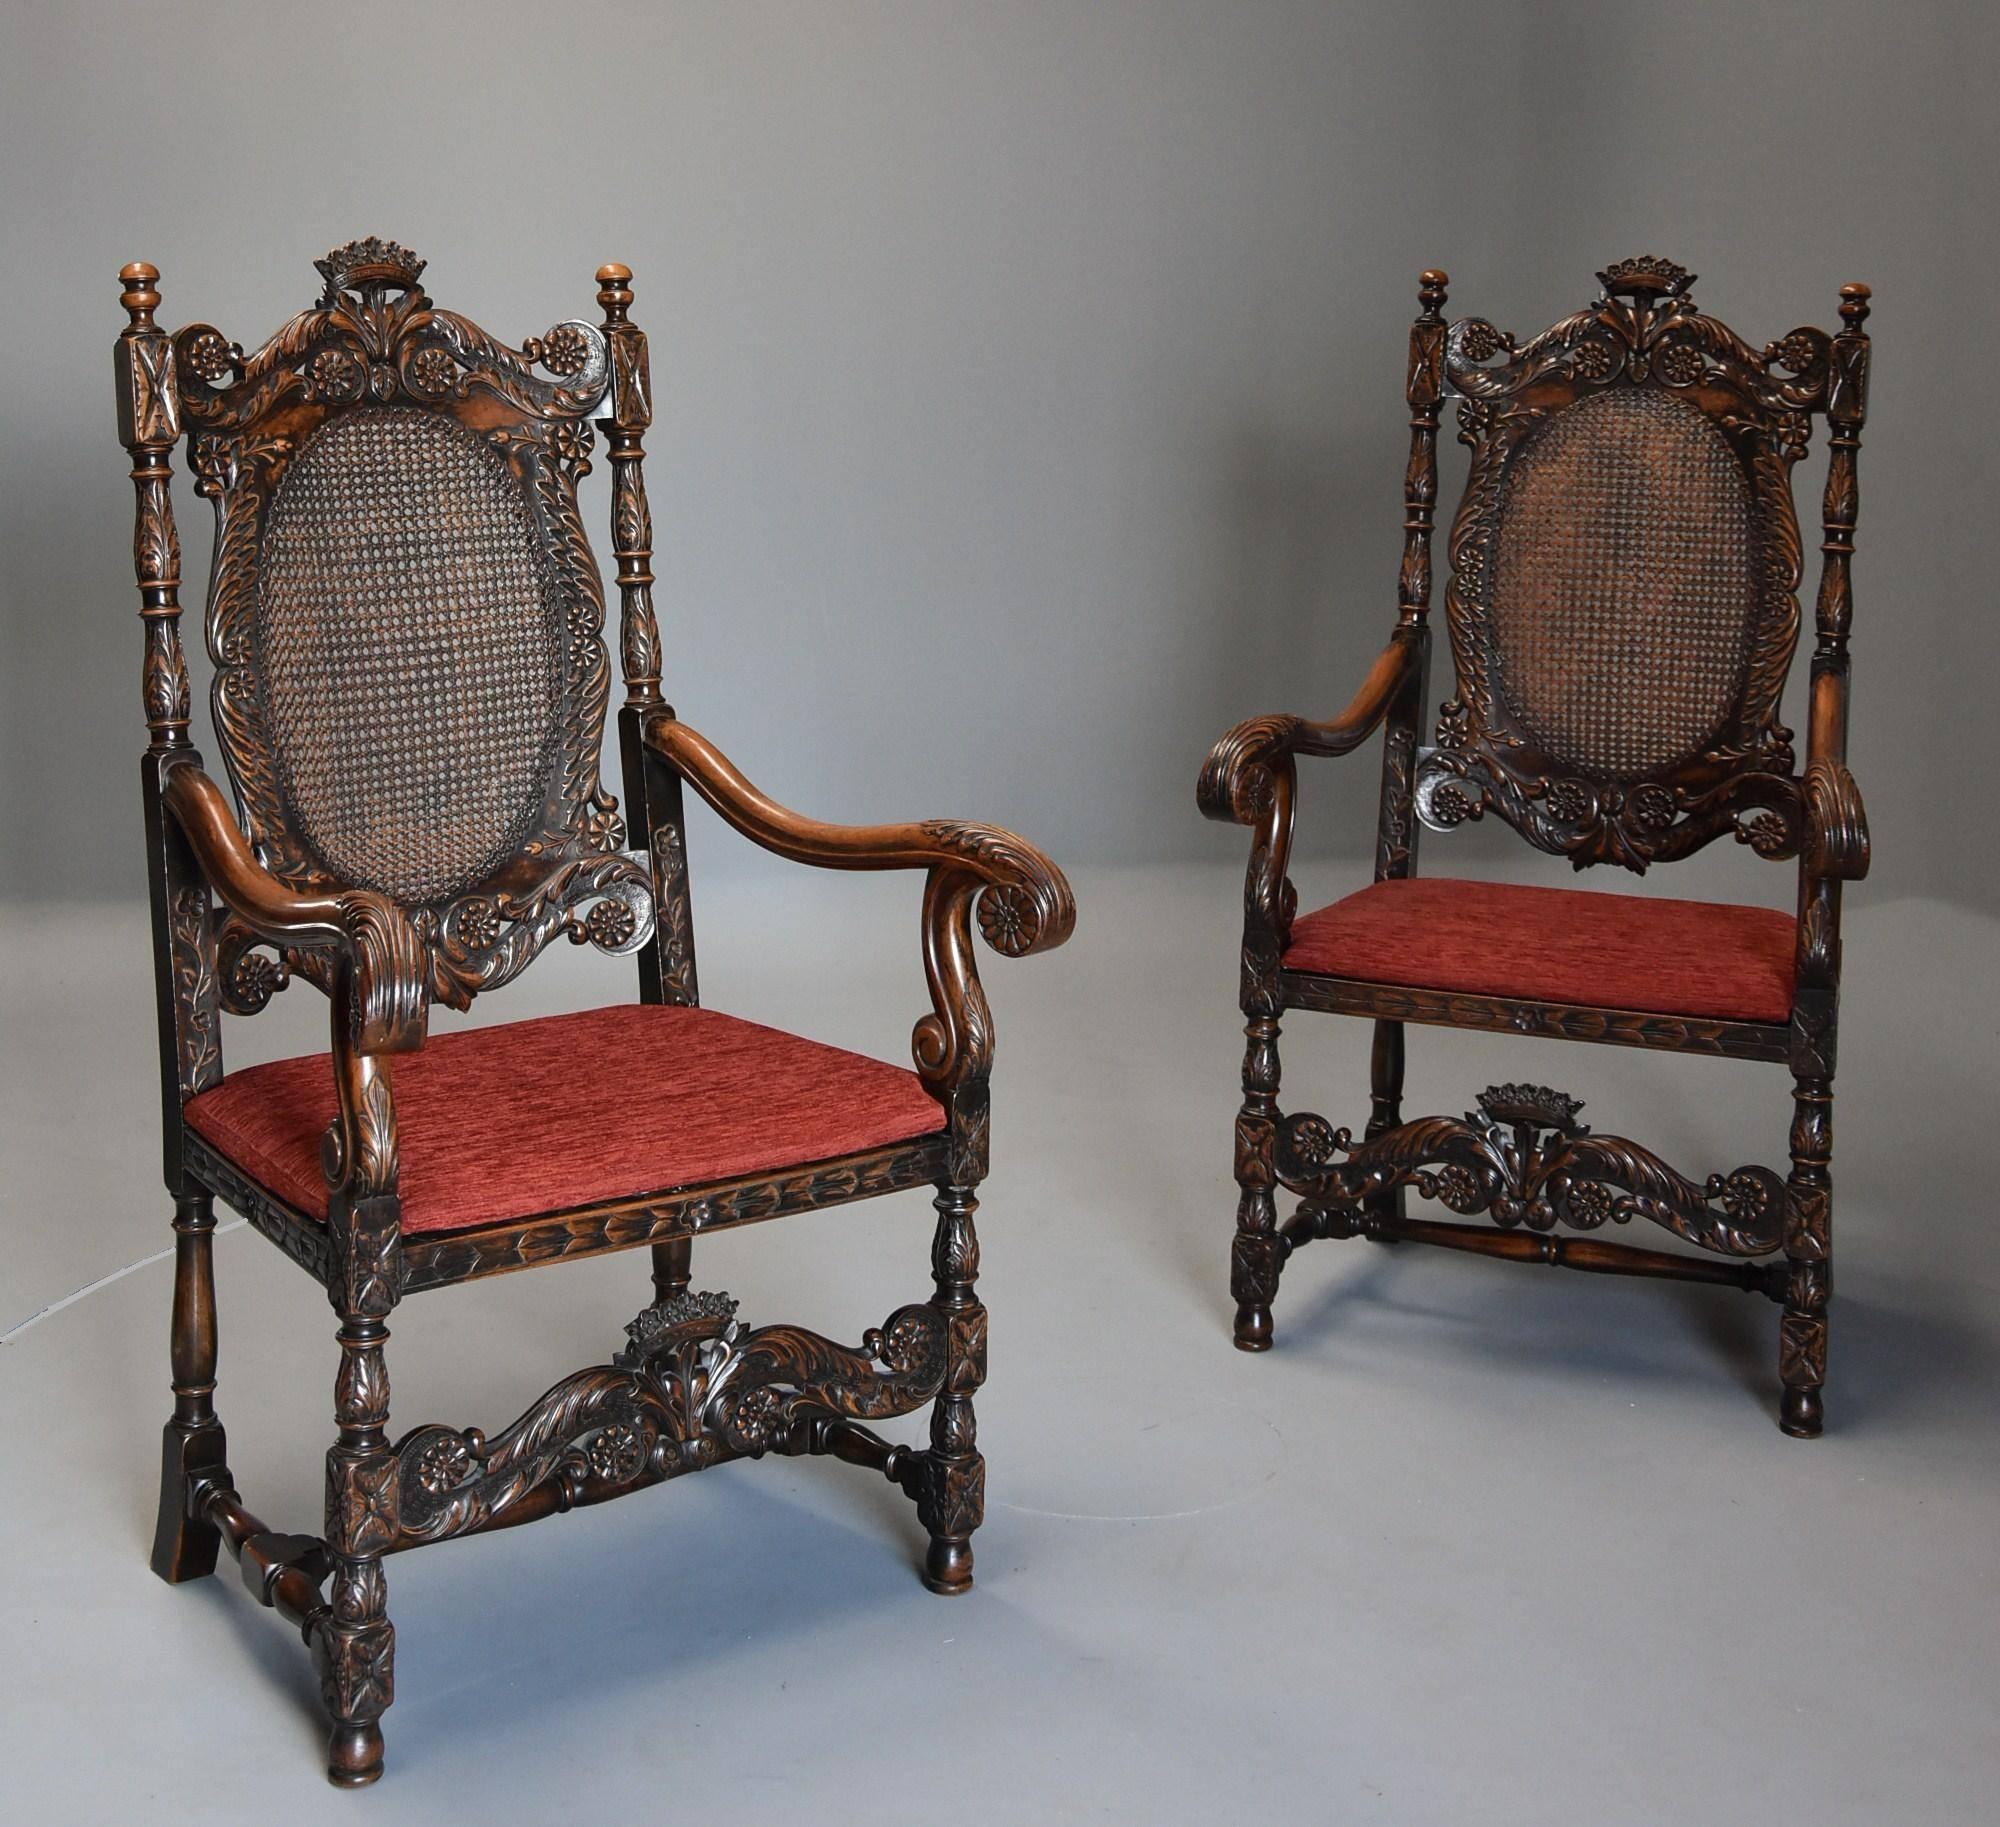 A superb pair of early 20th century Charles II or Carolean style walnut armchairs of substantial proportions.

This pair of chairs consist of a superbly carved top rail with crown of flowers to the centre, carved scrolling foliate decoration